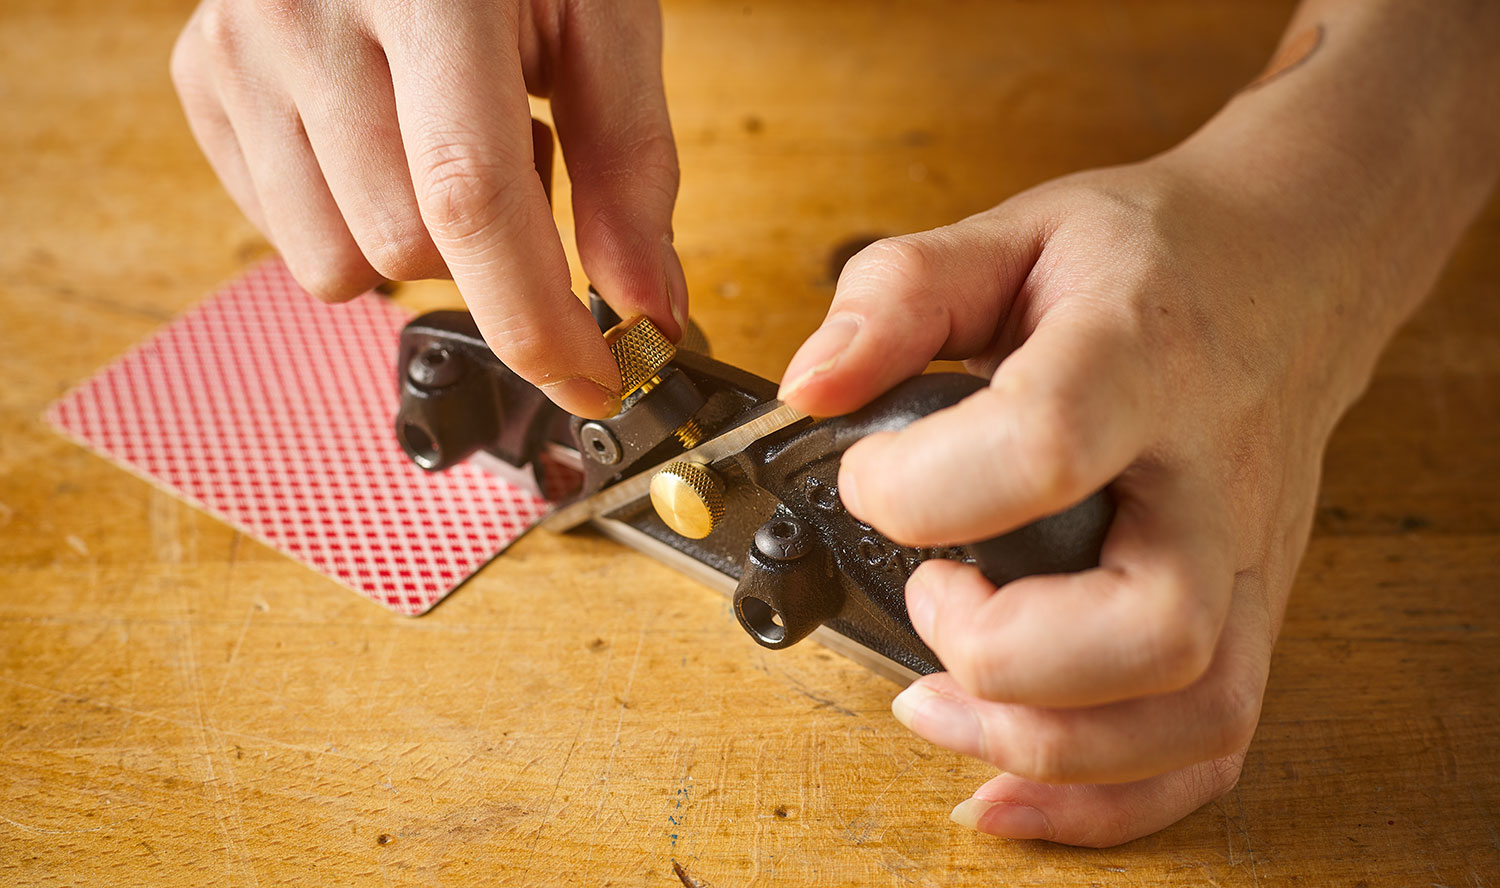 Setting blade projection on a box-maker’s plow plane, using a playing card as a shim under the skate.